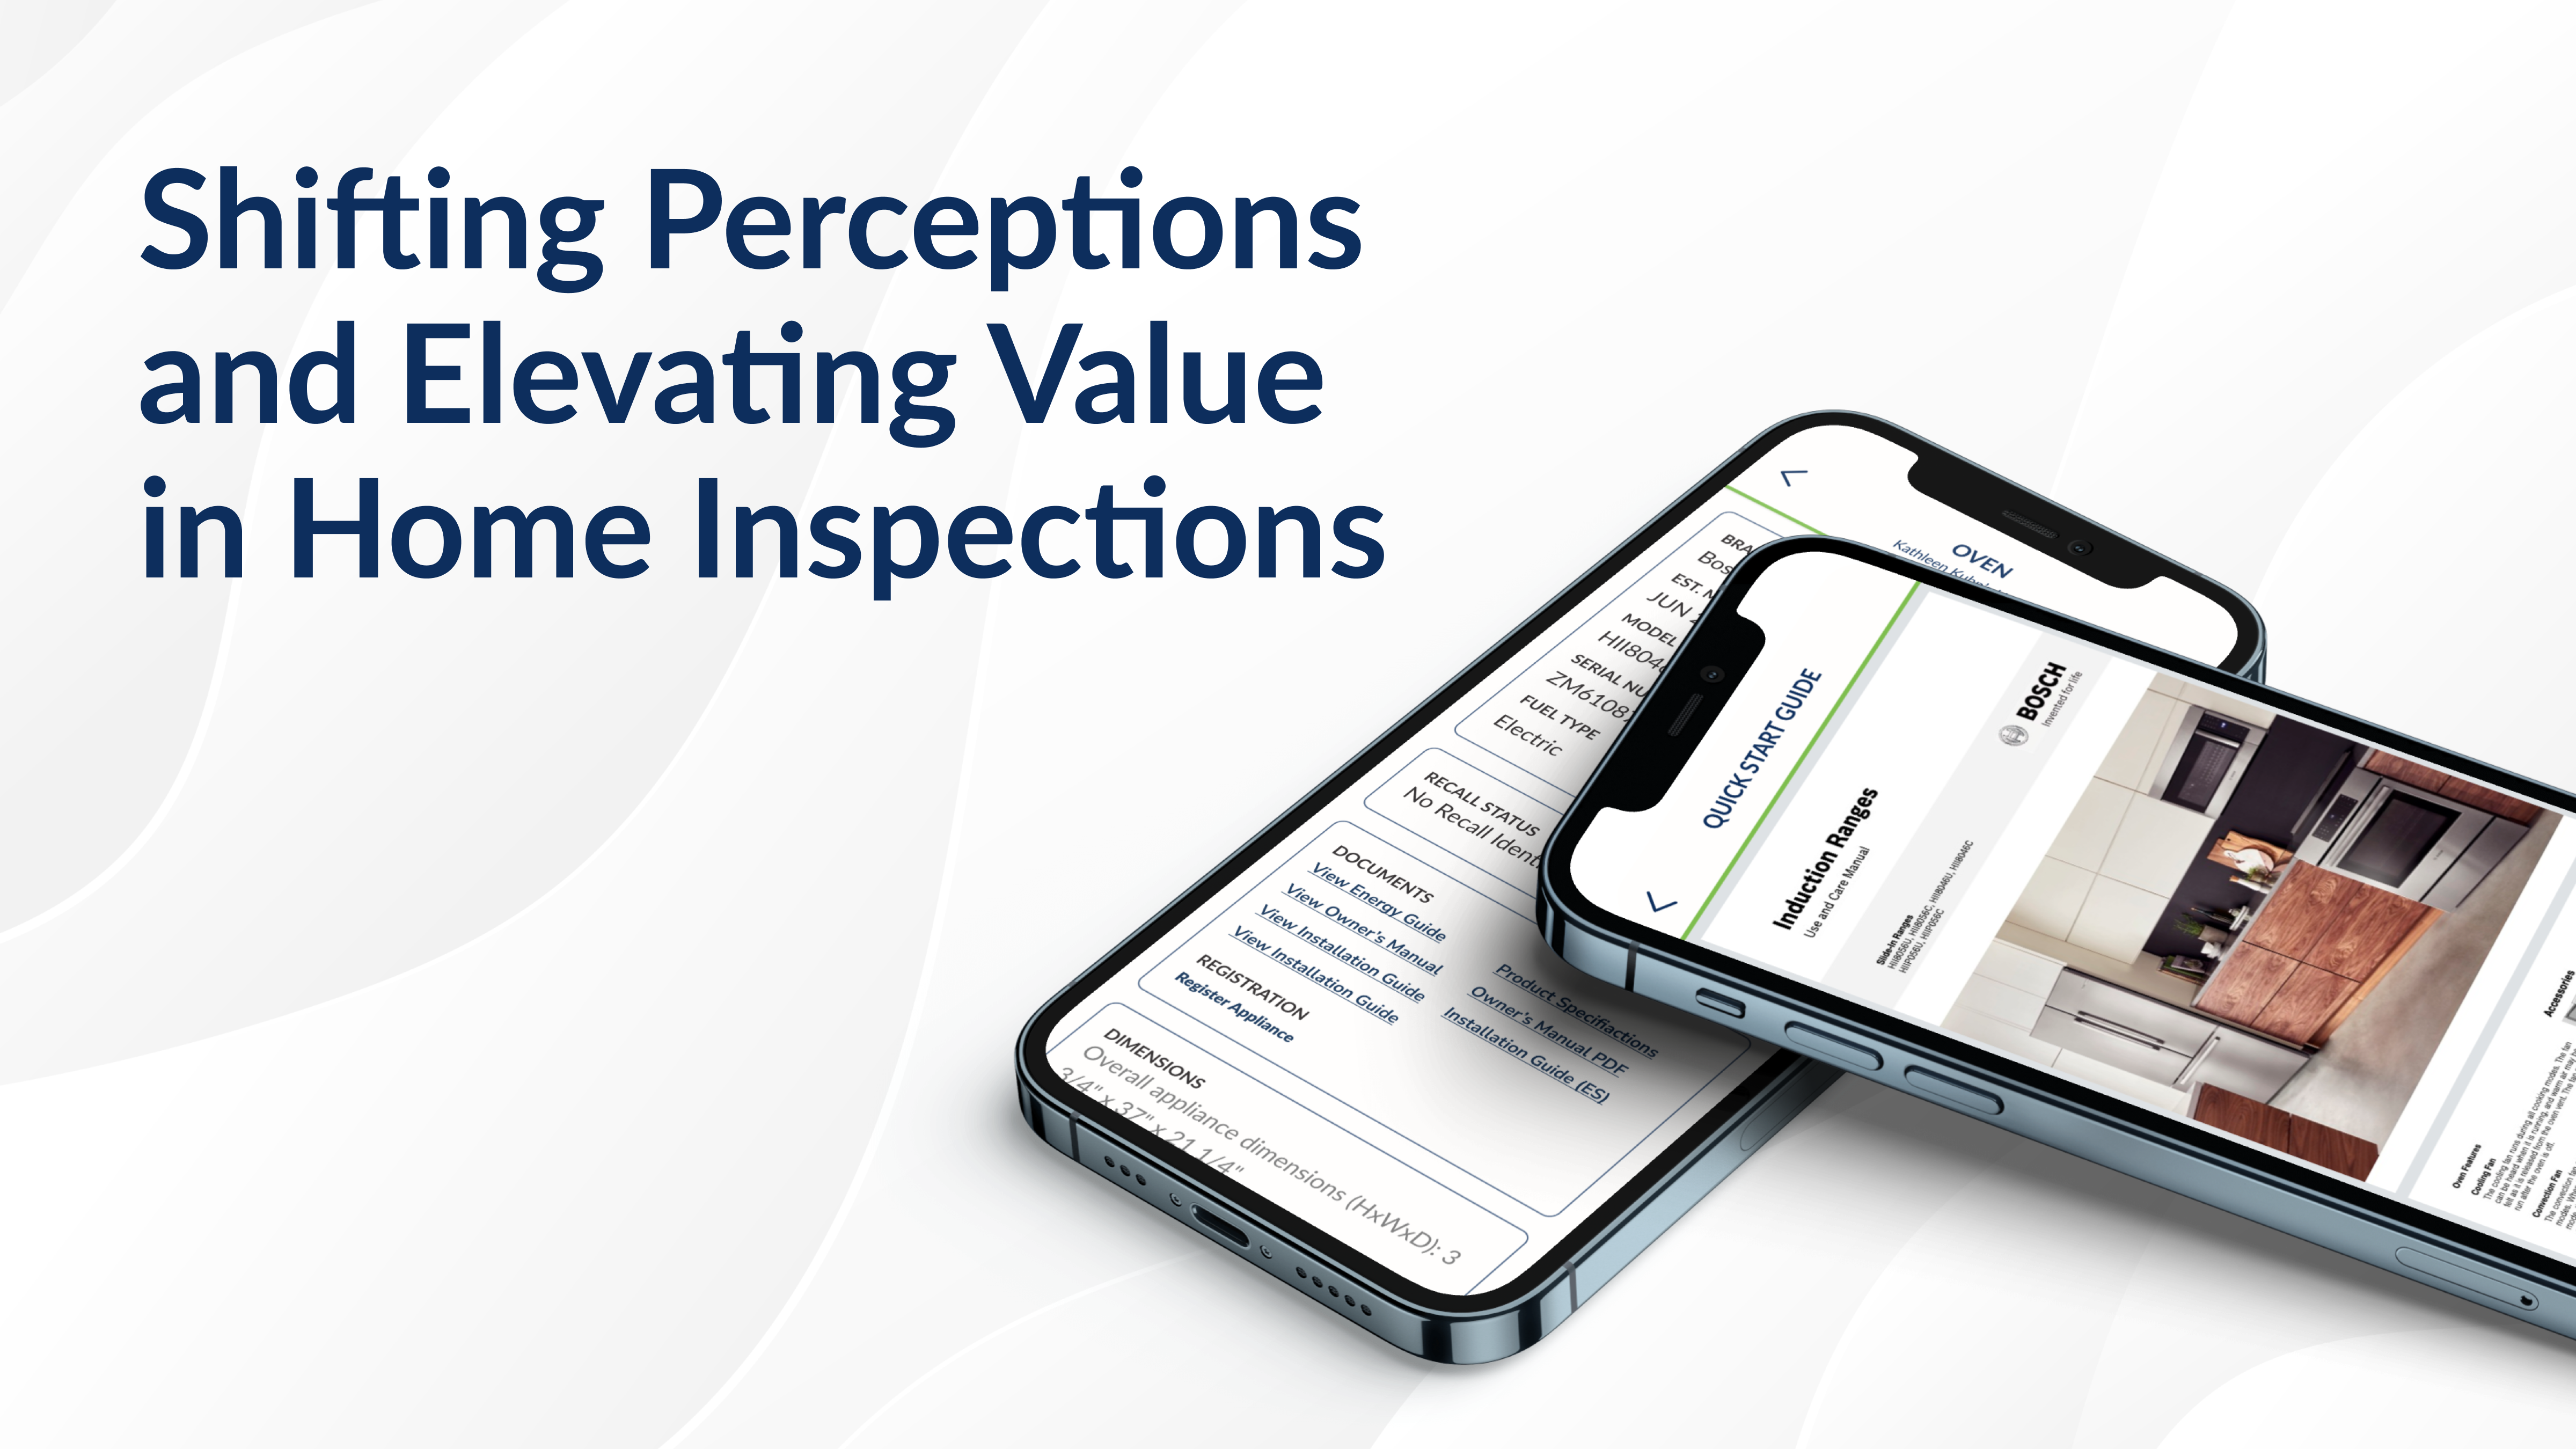 Shifting Perceptions and Elevating Value in Home Inspections